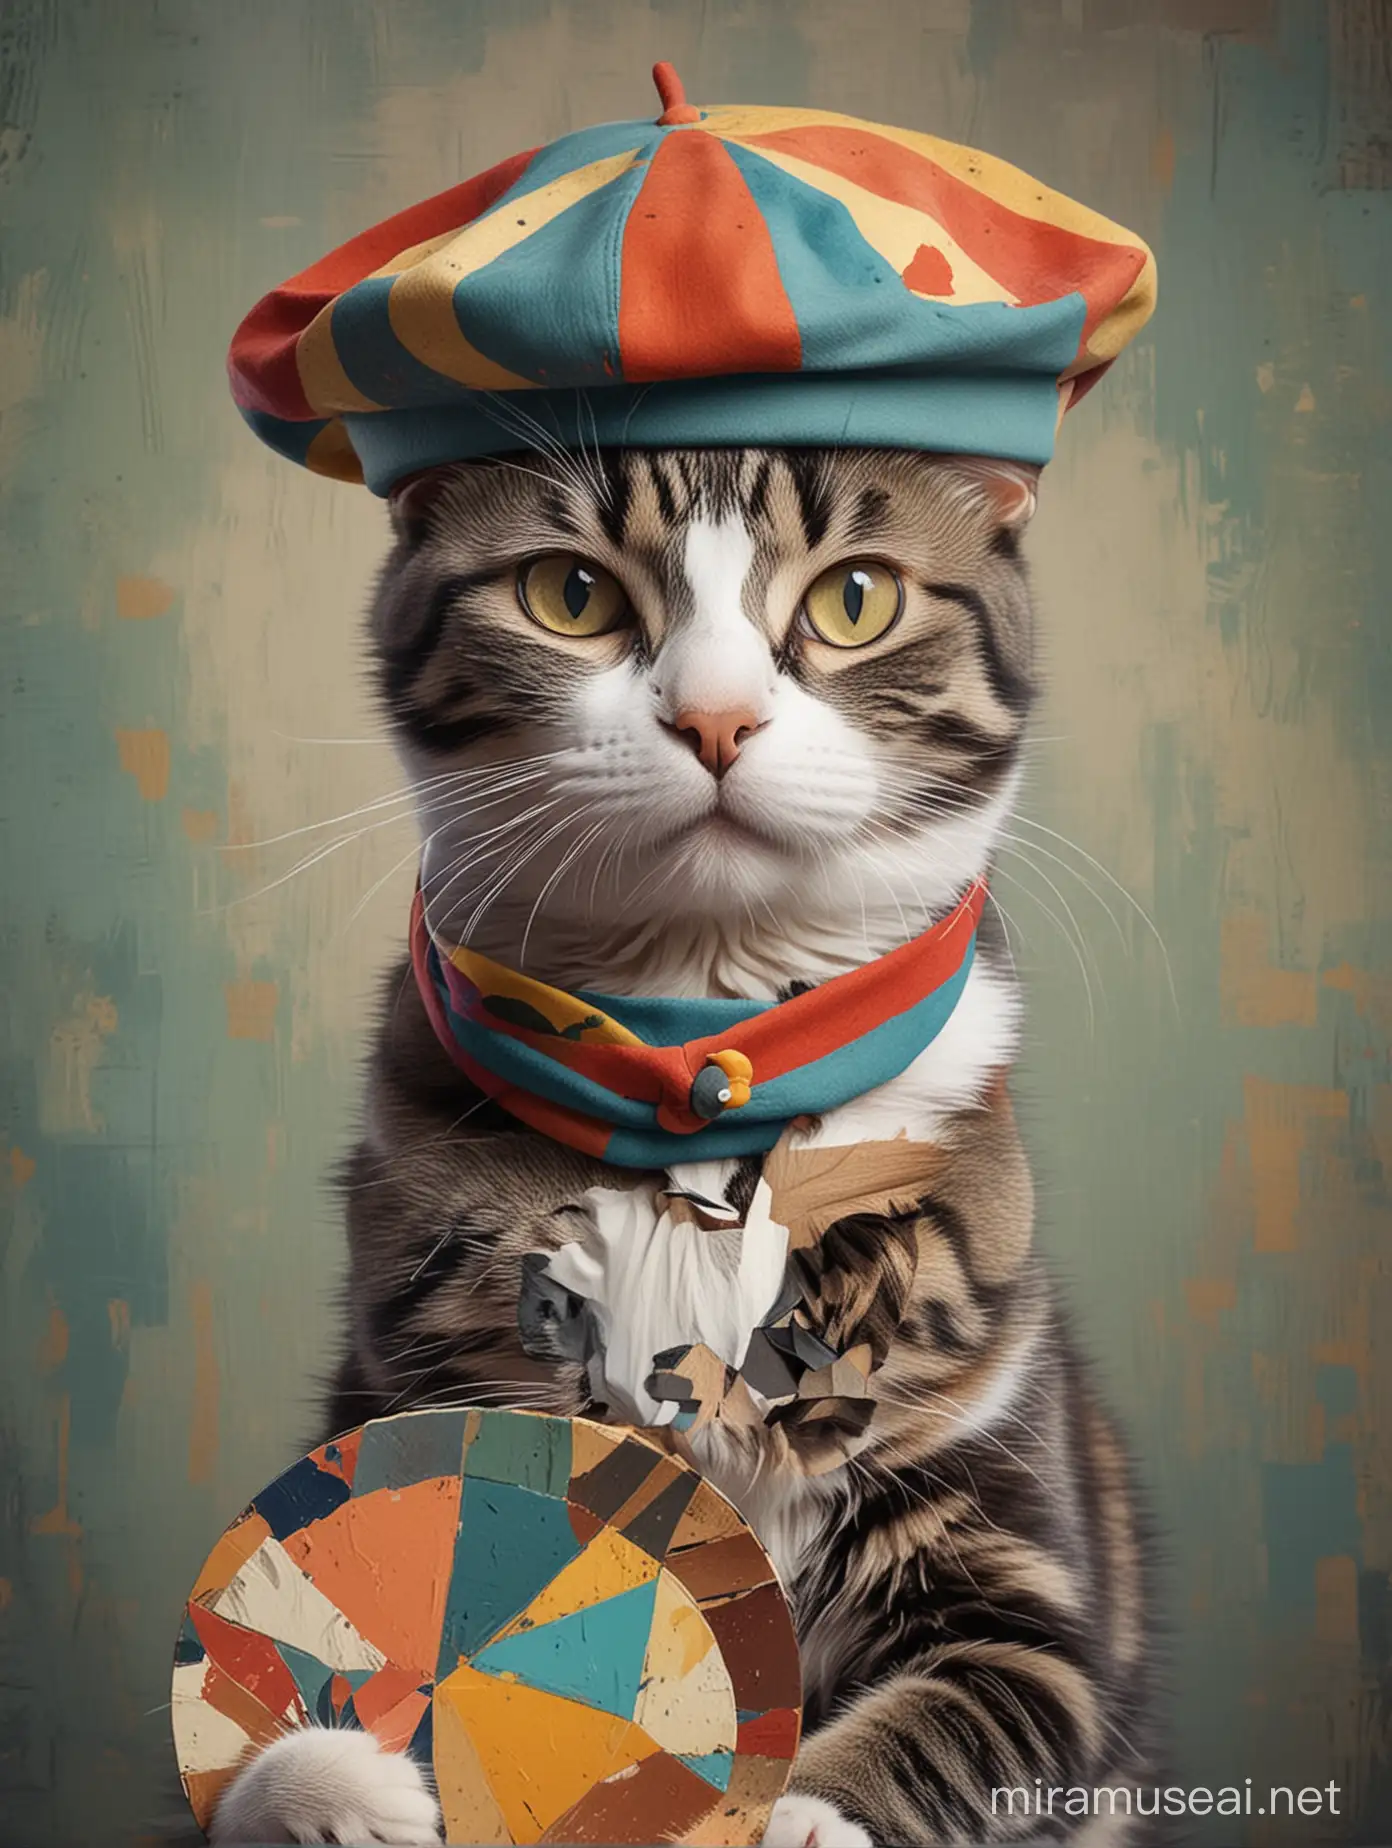 Generate an image of a cat wearing a beret and holding a palette, channeling the artistic spirit of Pablo Picasso with abstract patterns and vibrant colors.
